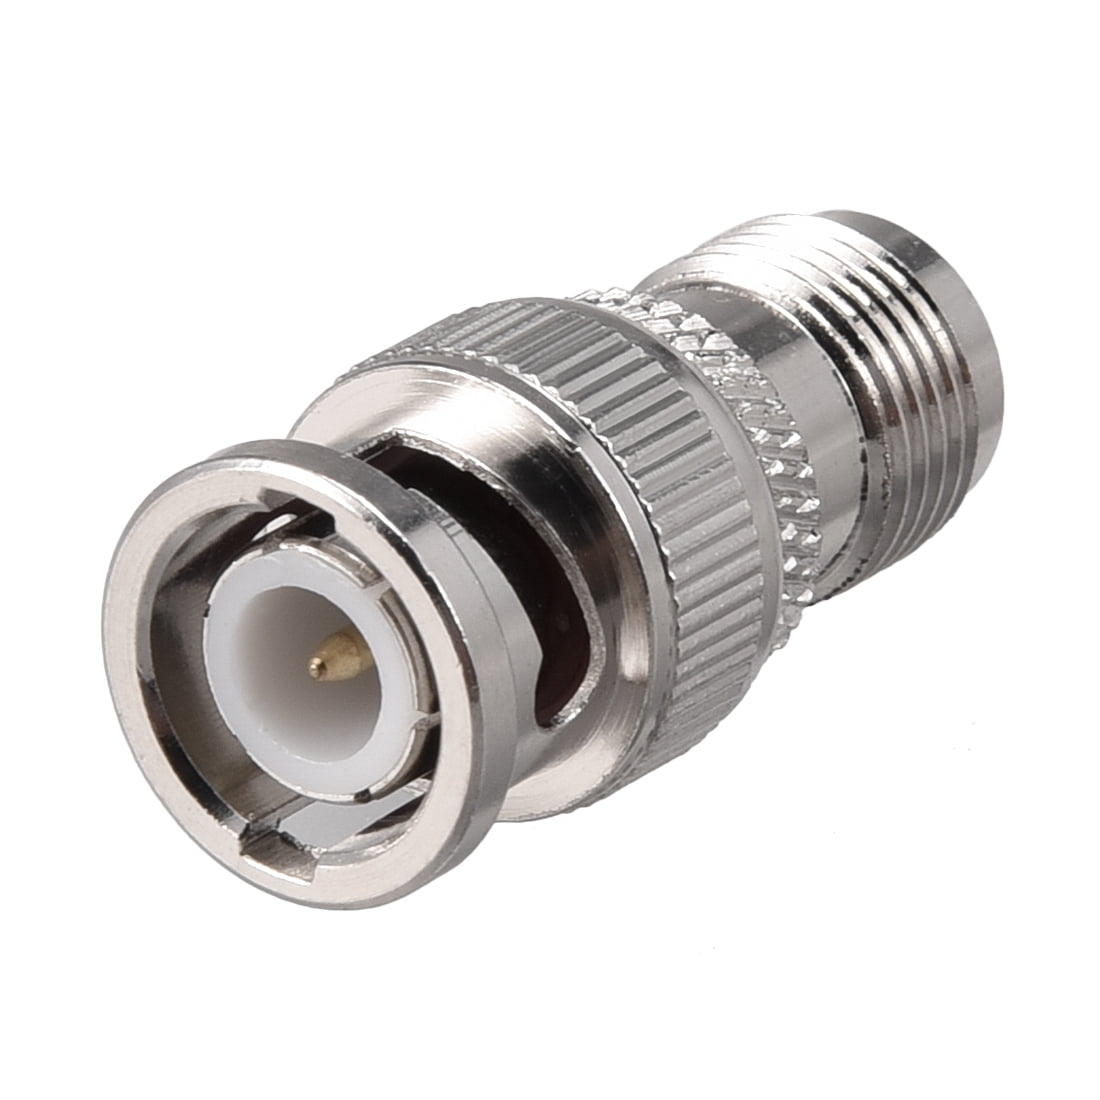 CES BNC MALE TO TNC FEMALE COAXIAL ADAPTER # TNC6 1 PIECE 620543 